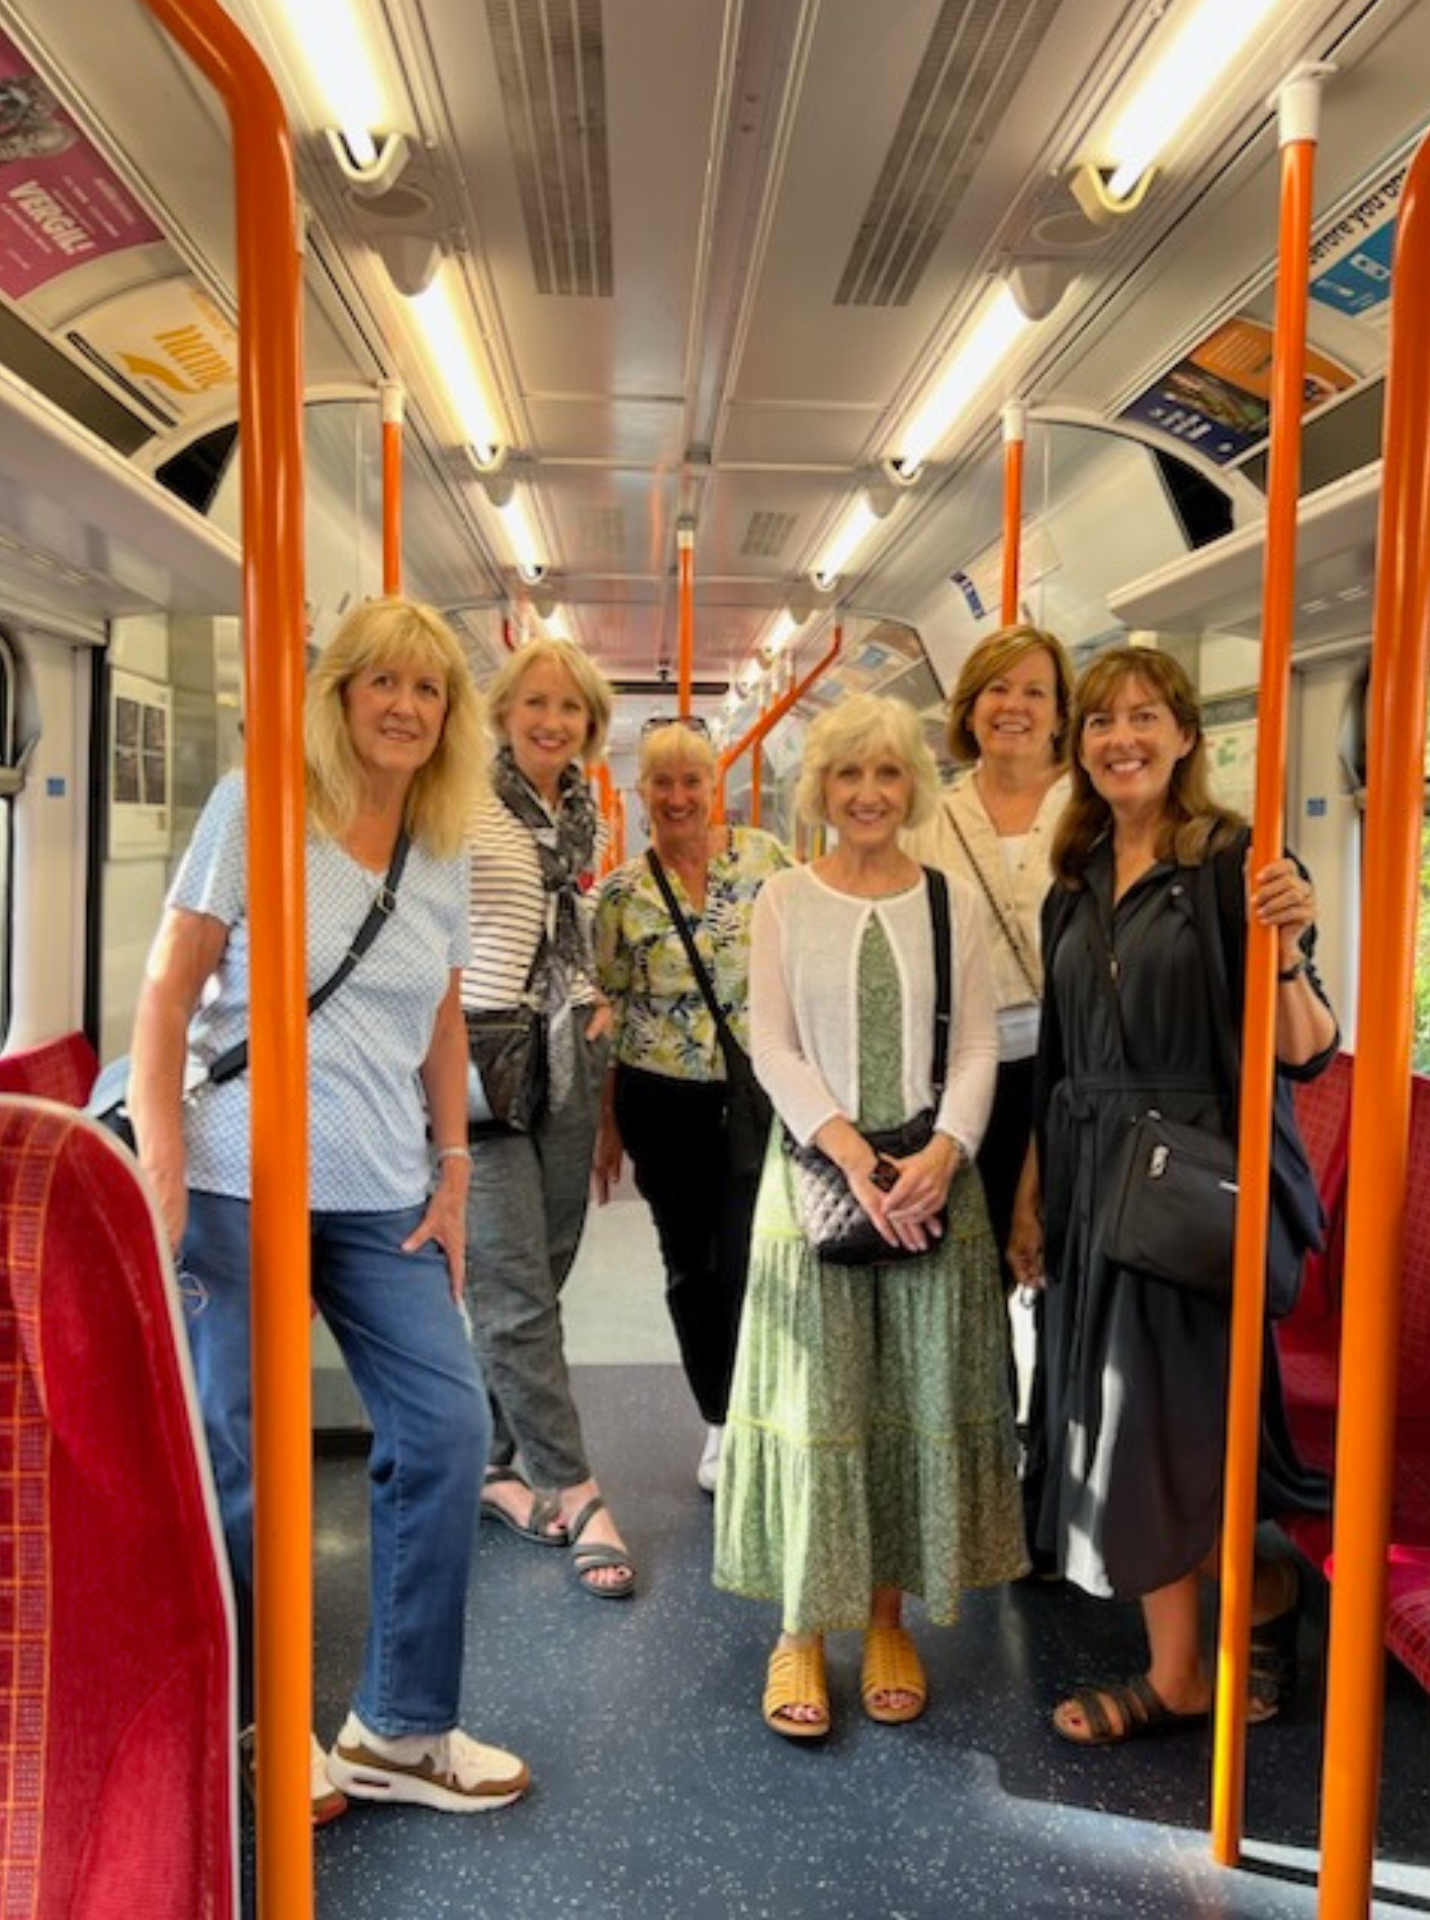 Most of our group on the overground train to London.